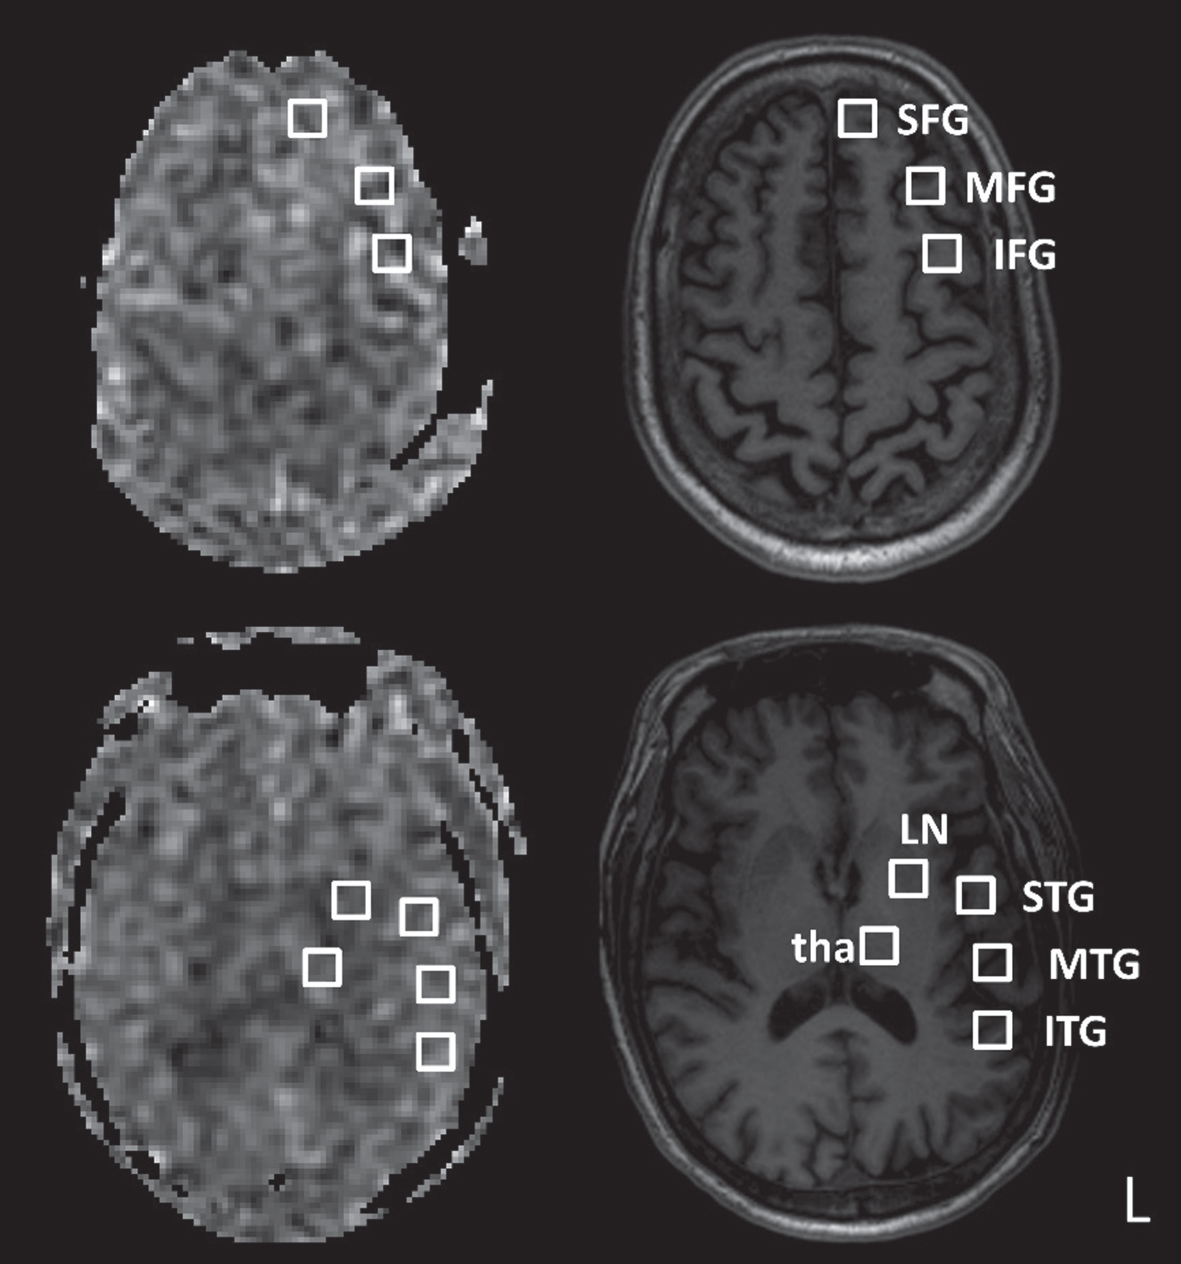 Example regions of interest in the left hemisphere. Cerebral blood flow maps (left column) and corresponding T1-weighted images (right column) are shown for two axial slices. SFG, superior frontal gyrus; MFG, middle frontal gyrus; IFG, inferior frontal gyrus; STG, superior temporal gyrus; MTG, middle temporal gyrus; ITG, inferior temporal gyrus; LN, lentiform nucleus; tha, thalamus. The regions of interest are of equal size.